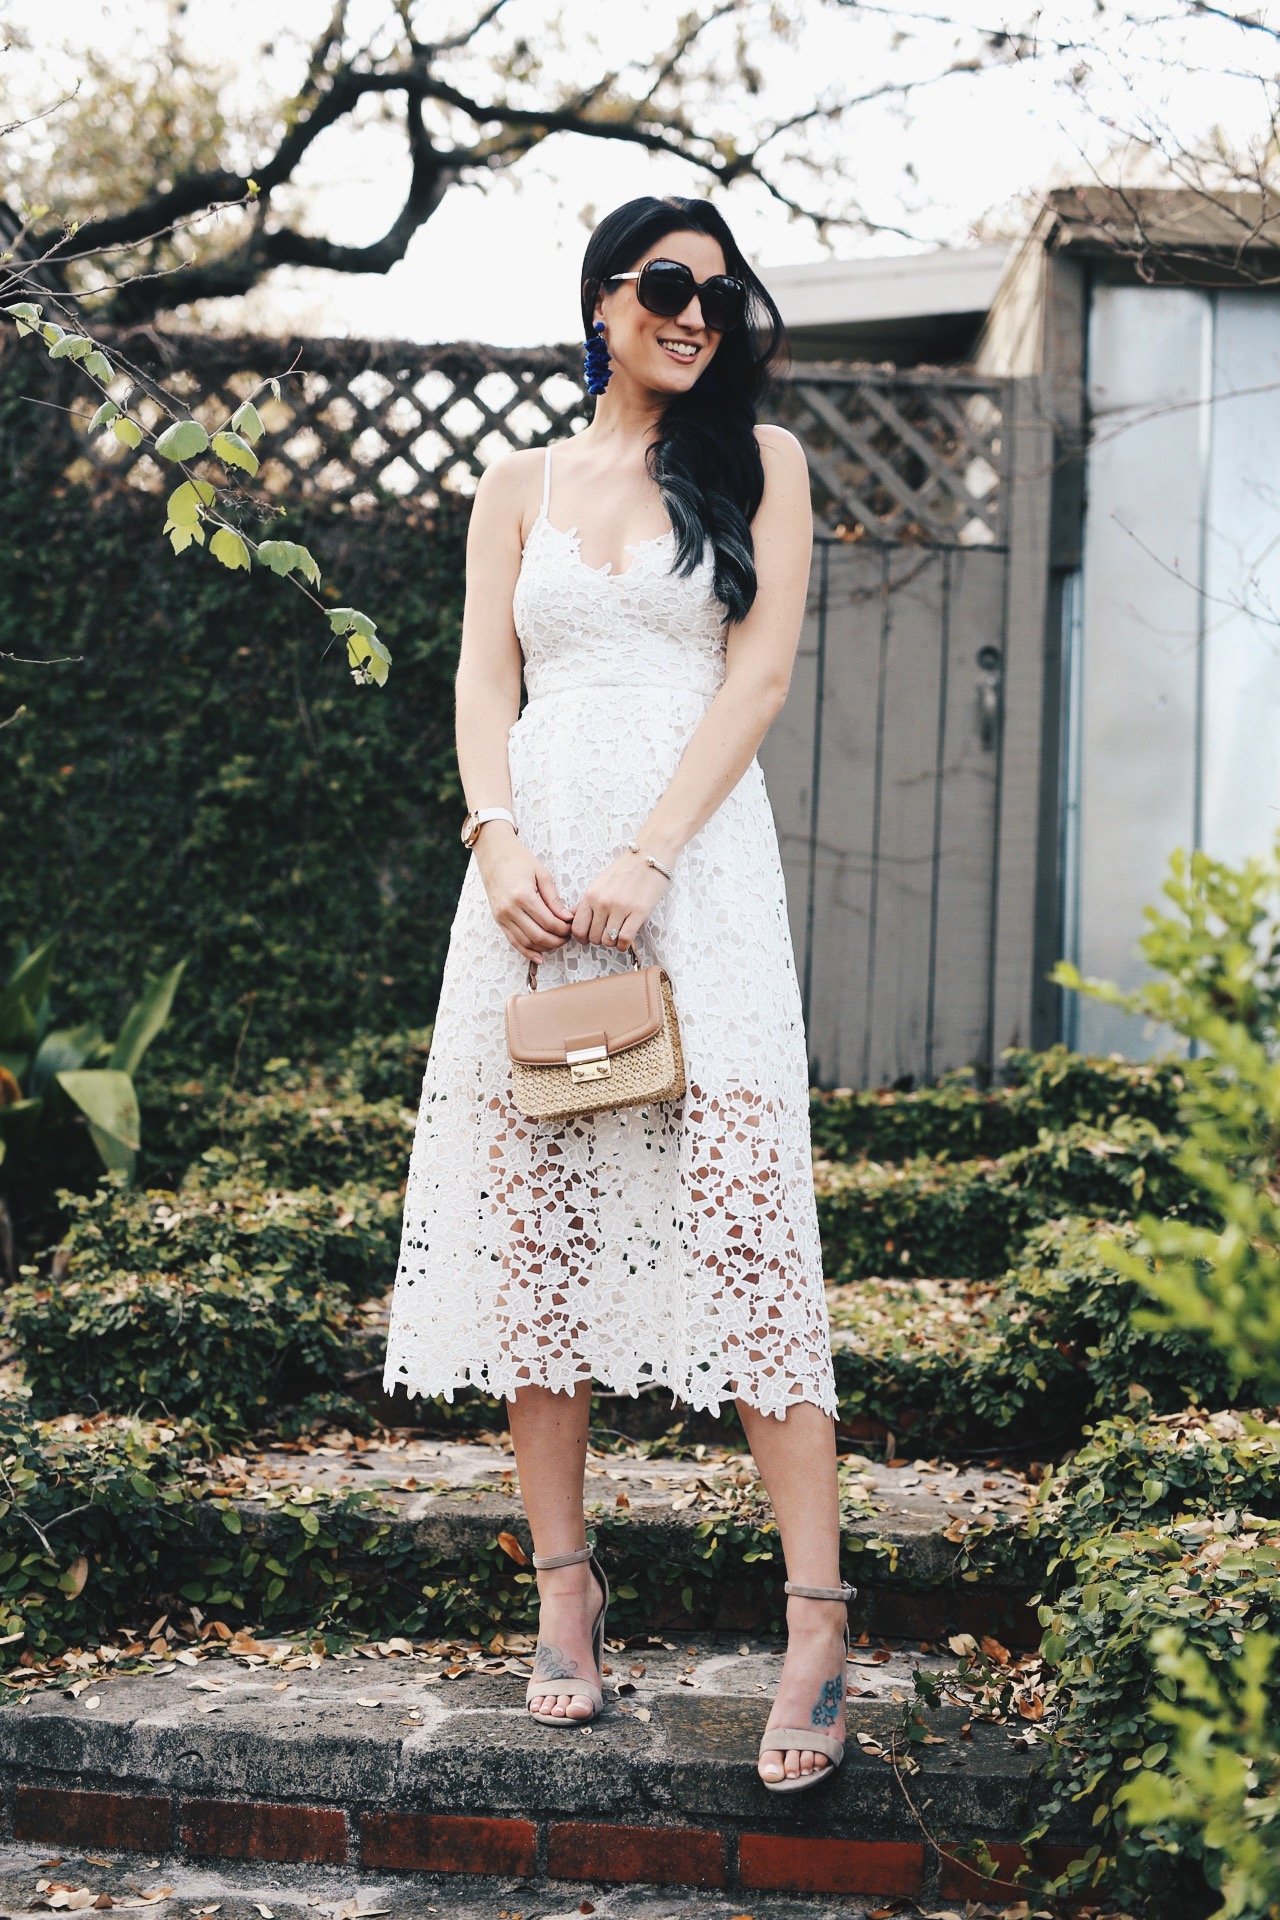 Cute Easter Dresses featured by top US fashion blog Dressed to Kill; Image of a woman wearing ASTR dress, Steve Madden shoes, H&M handbag, Marc Jacobs watch, Baublebar earrings, David Yurman bracelet and Nordstrom sunglasses.